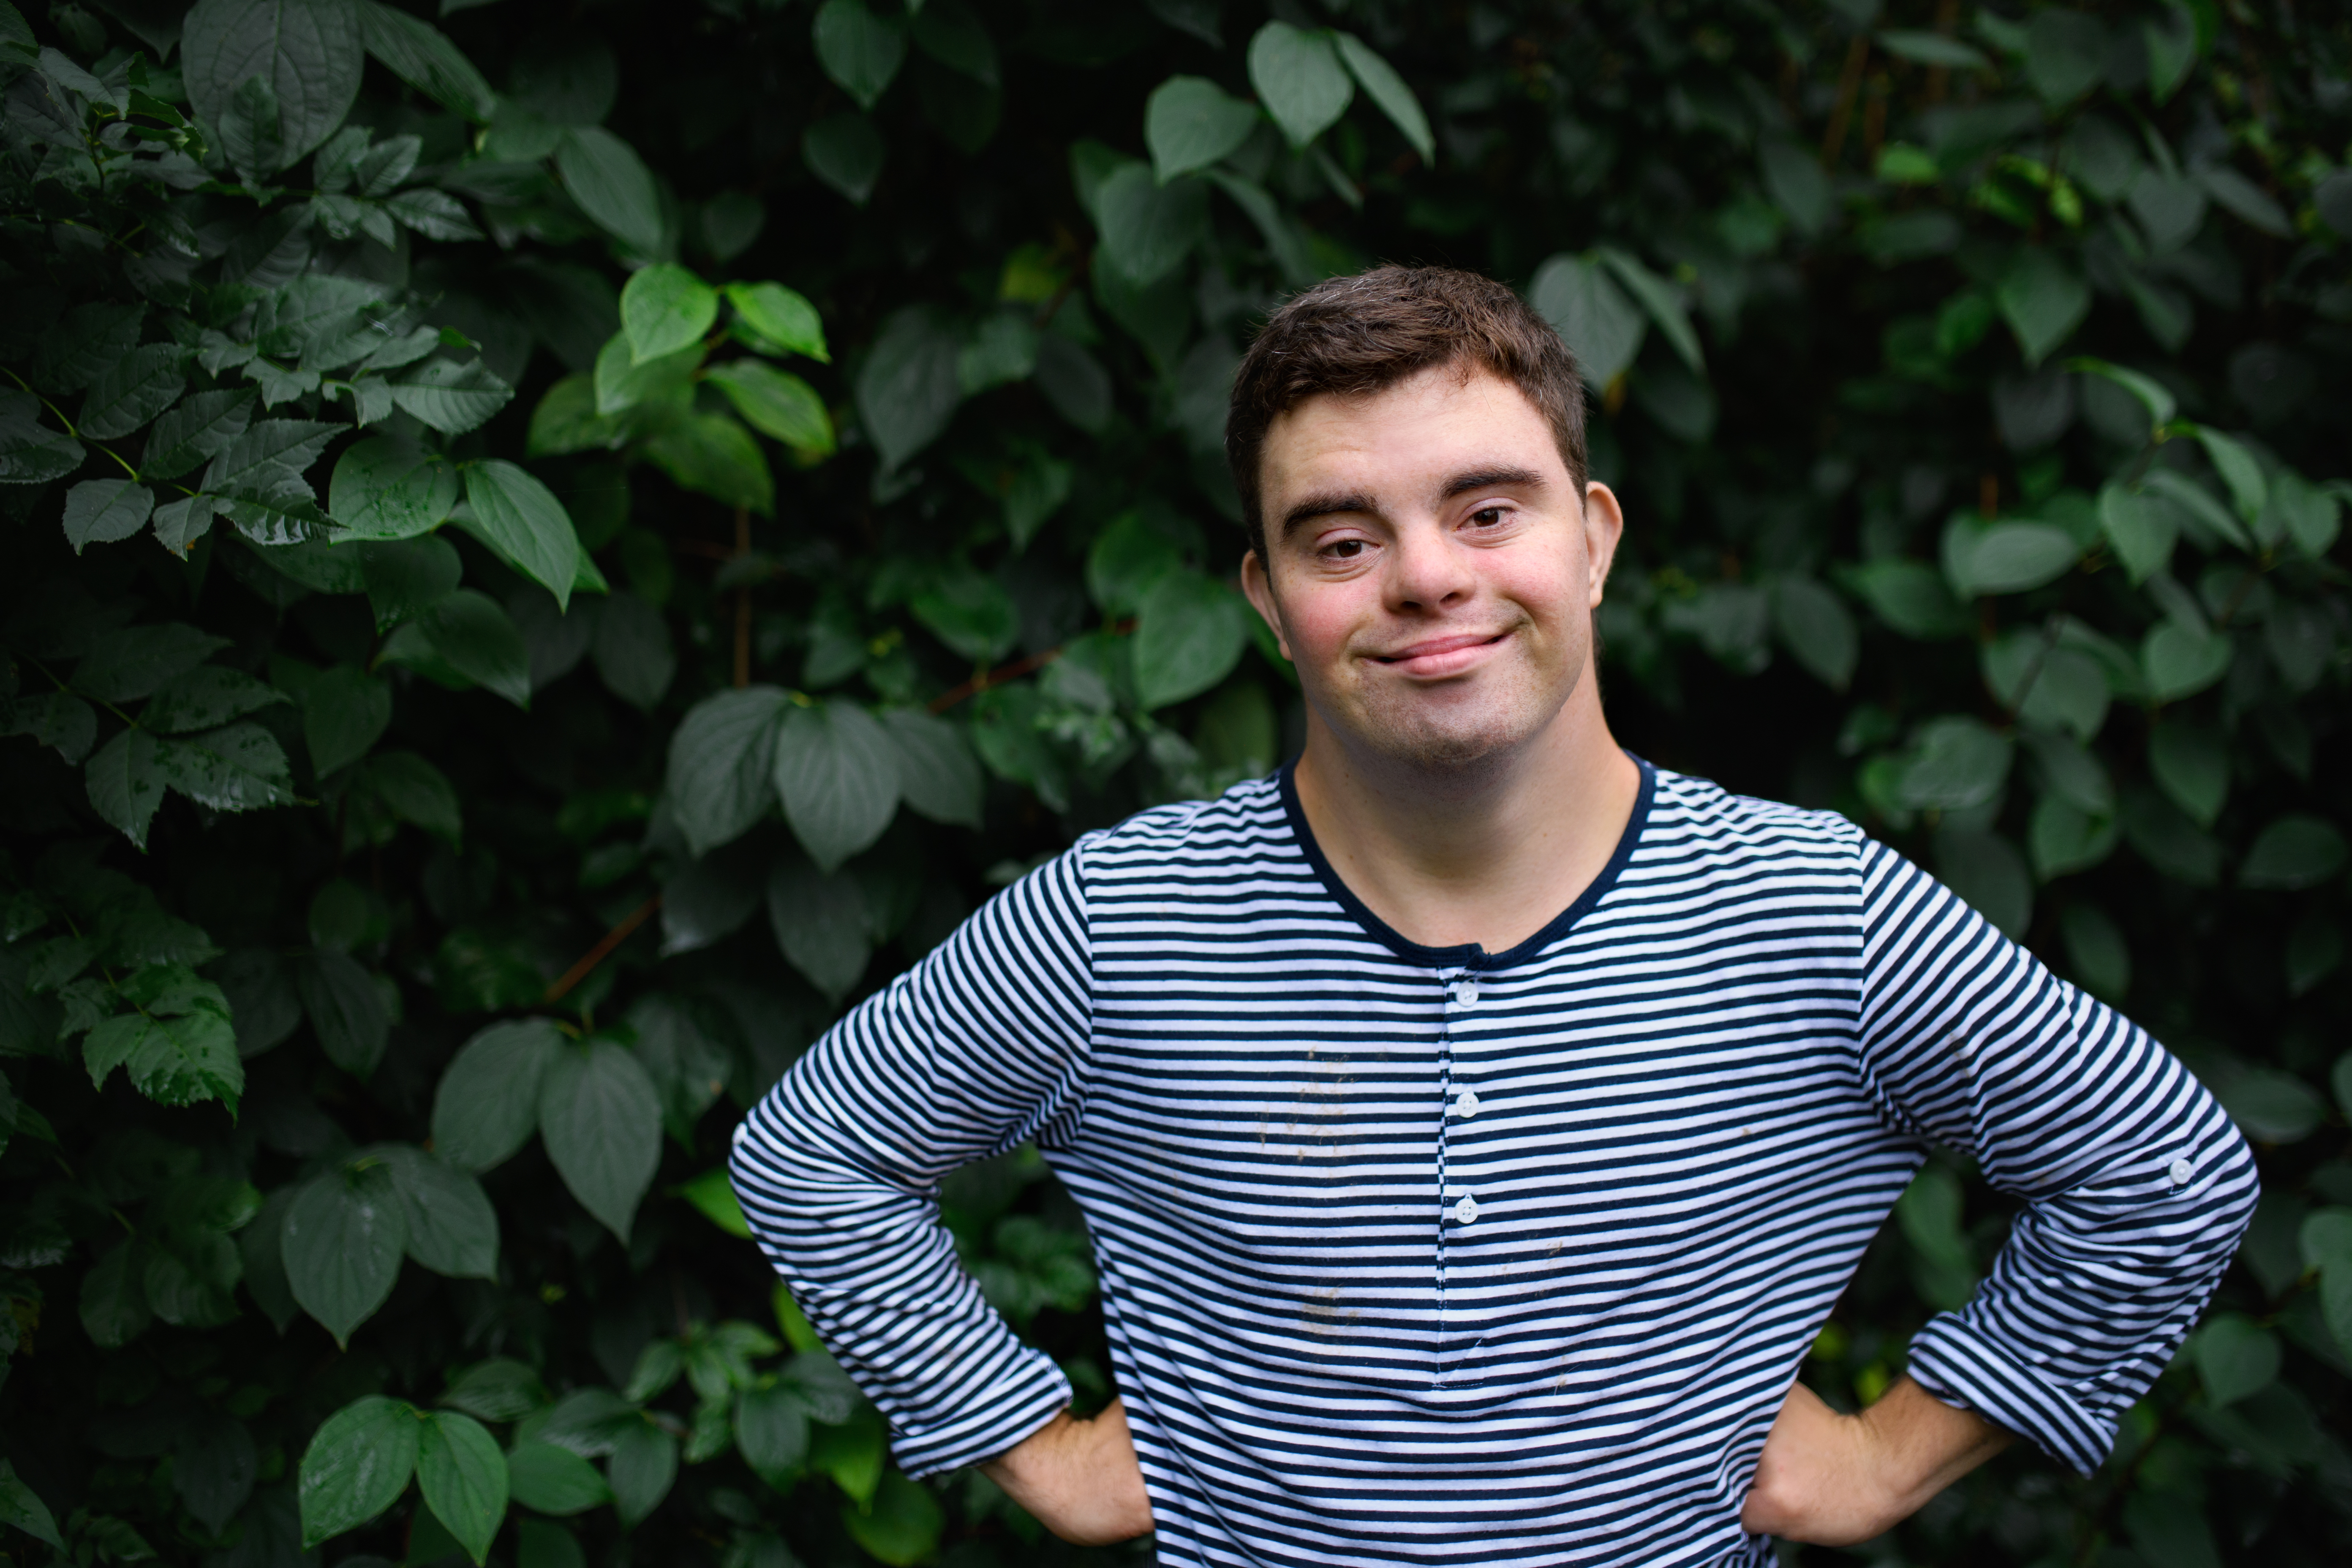 Man with Down syndrome posing outside. | Source: Shutterstock